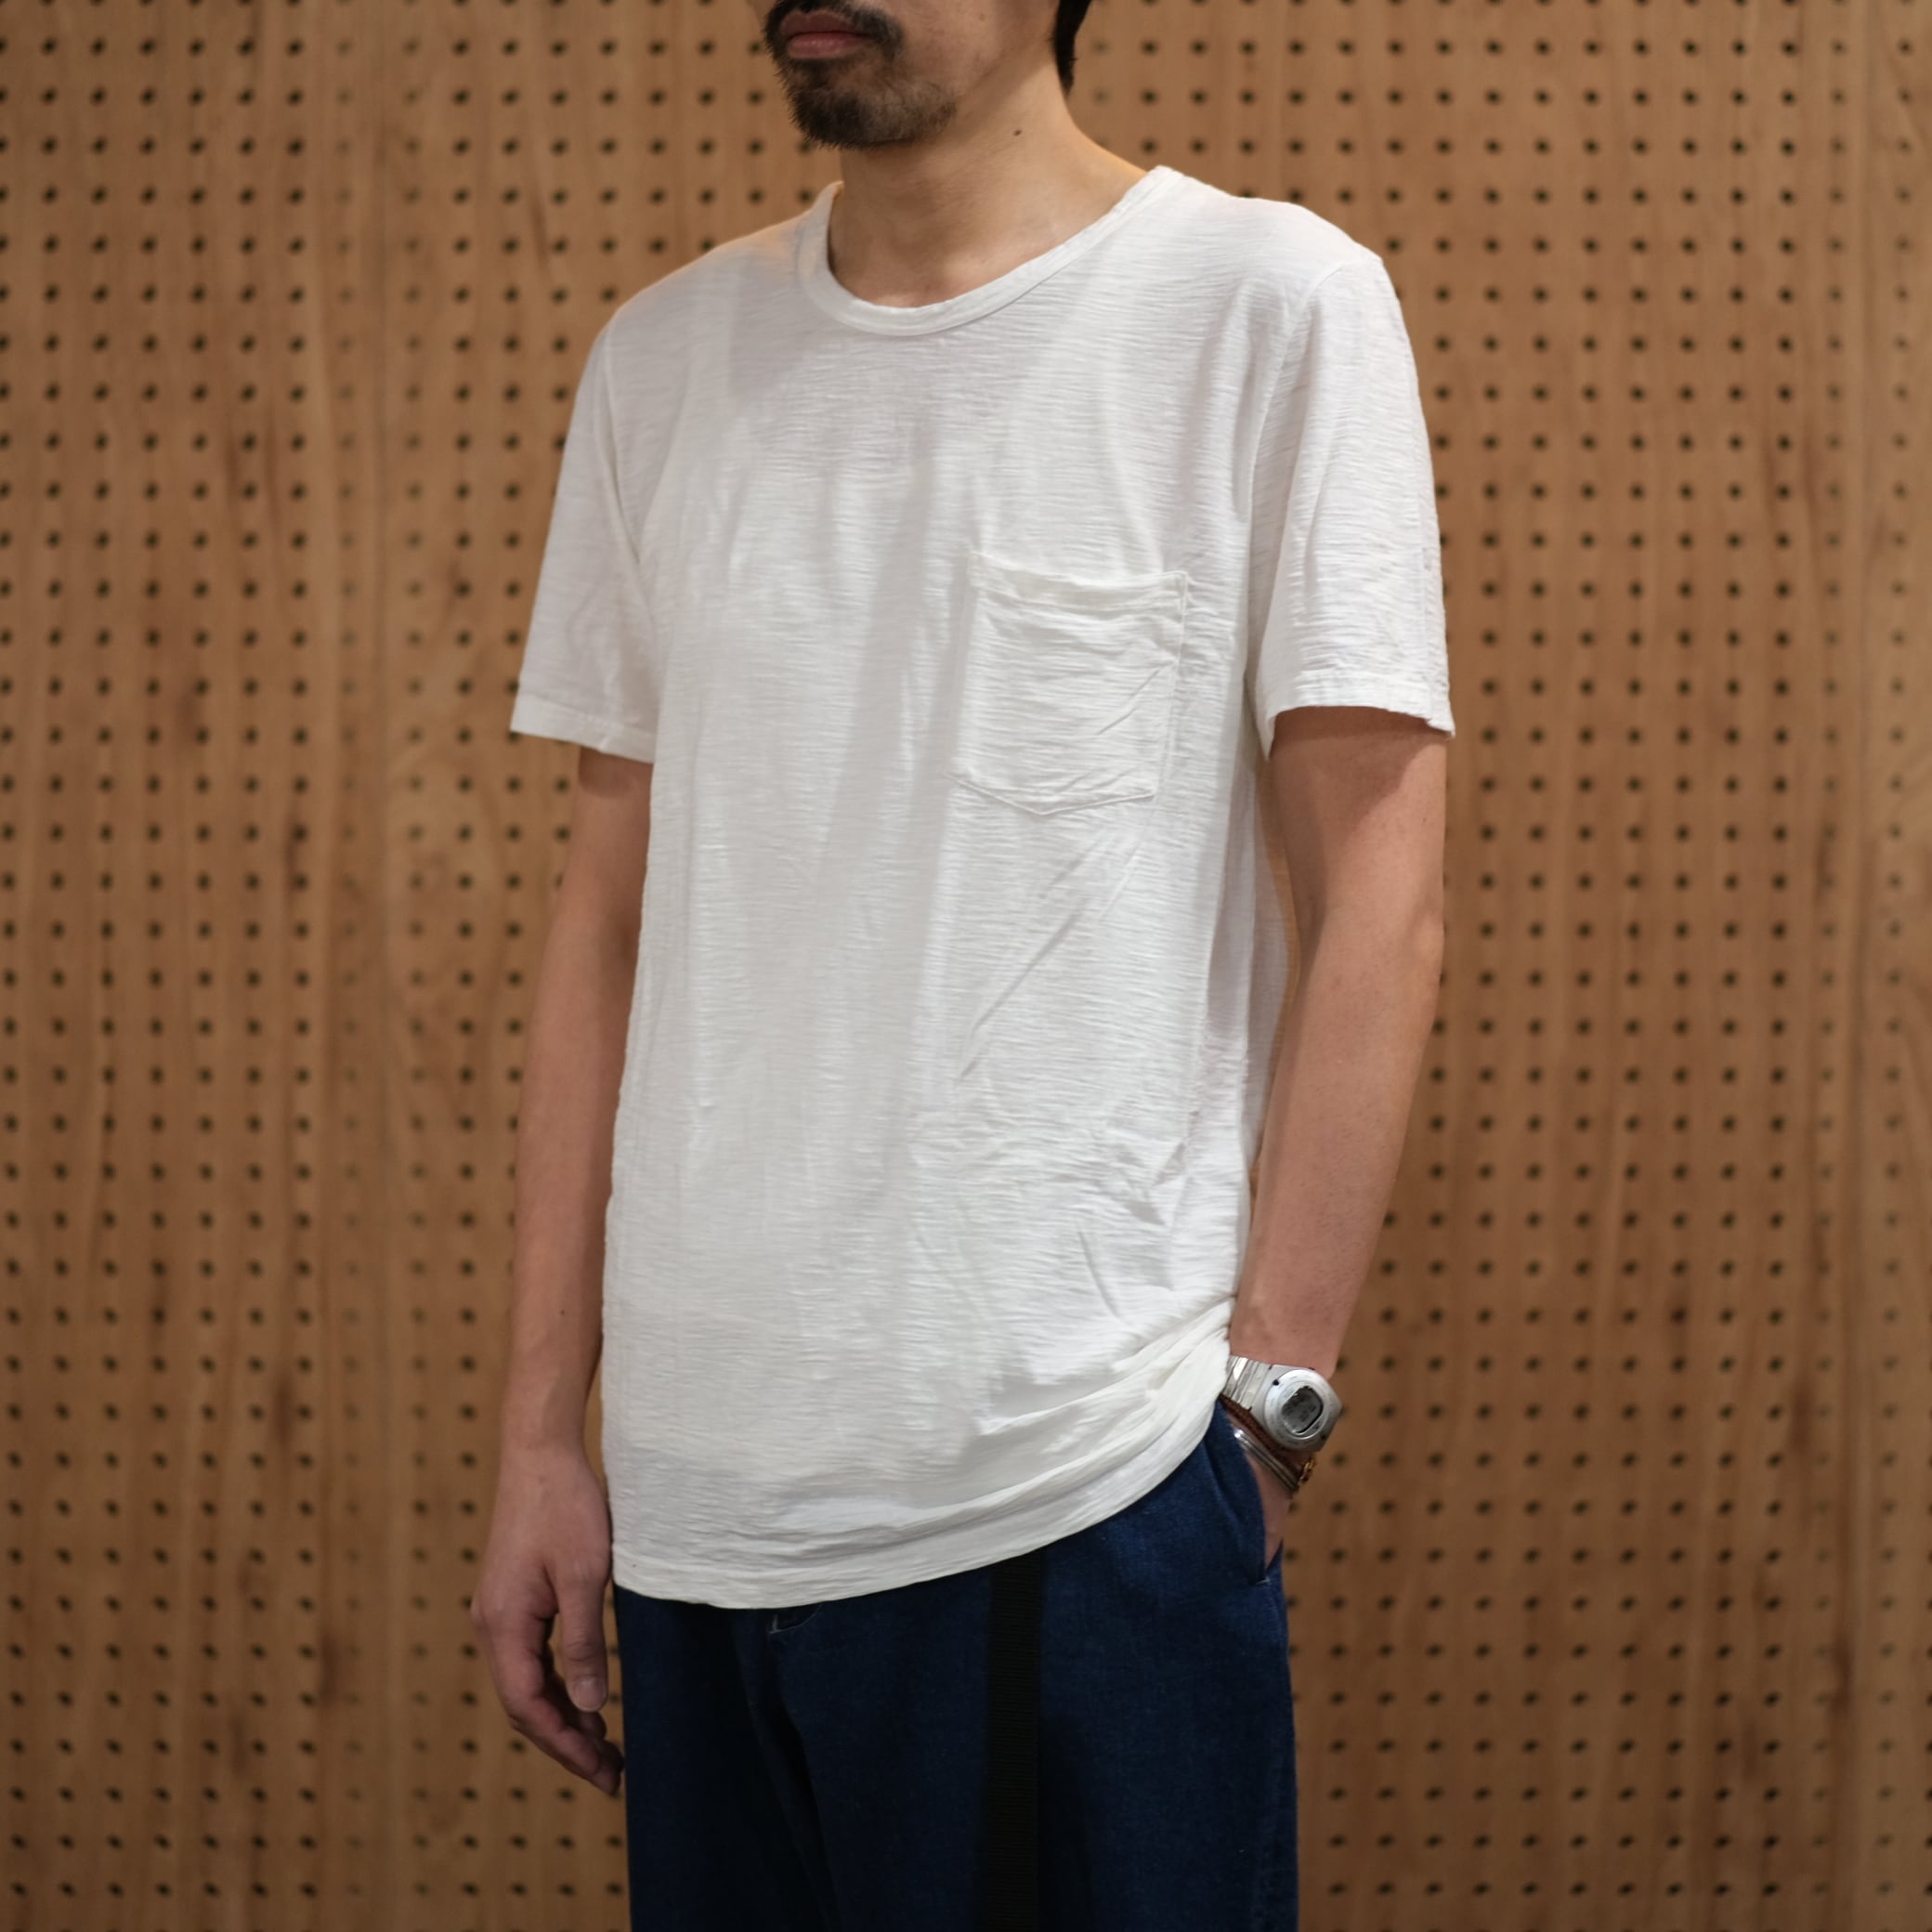 Schiesser Revival（シーサーリバイバル）hanno shirt 1/2 crew neck -nature- #158294-400  | roamers and seekers